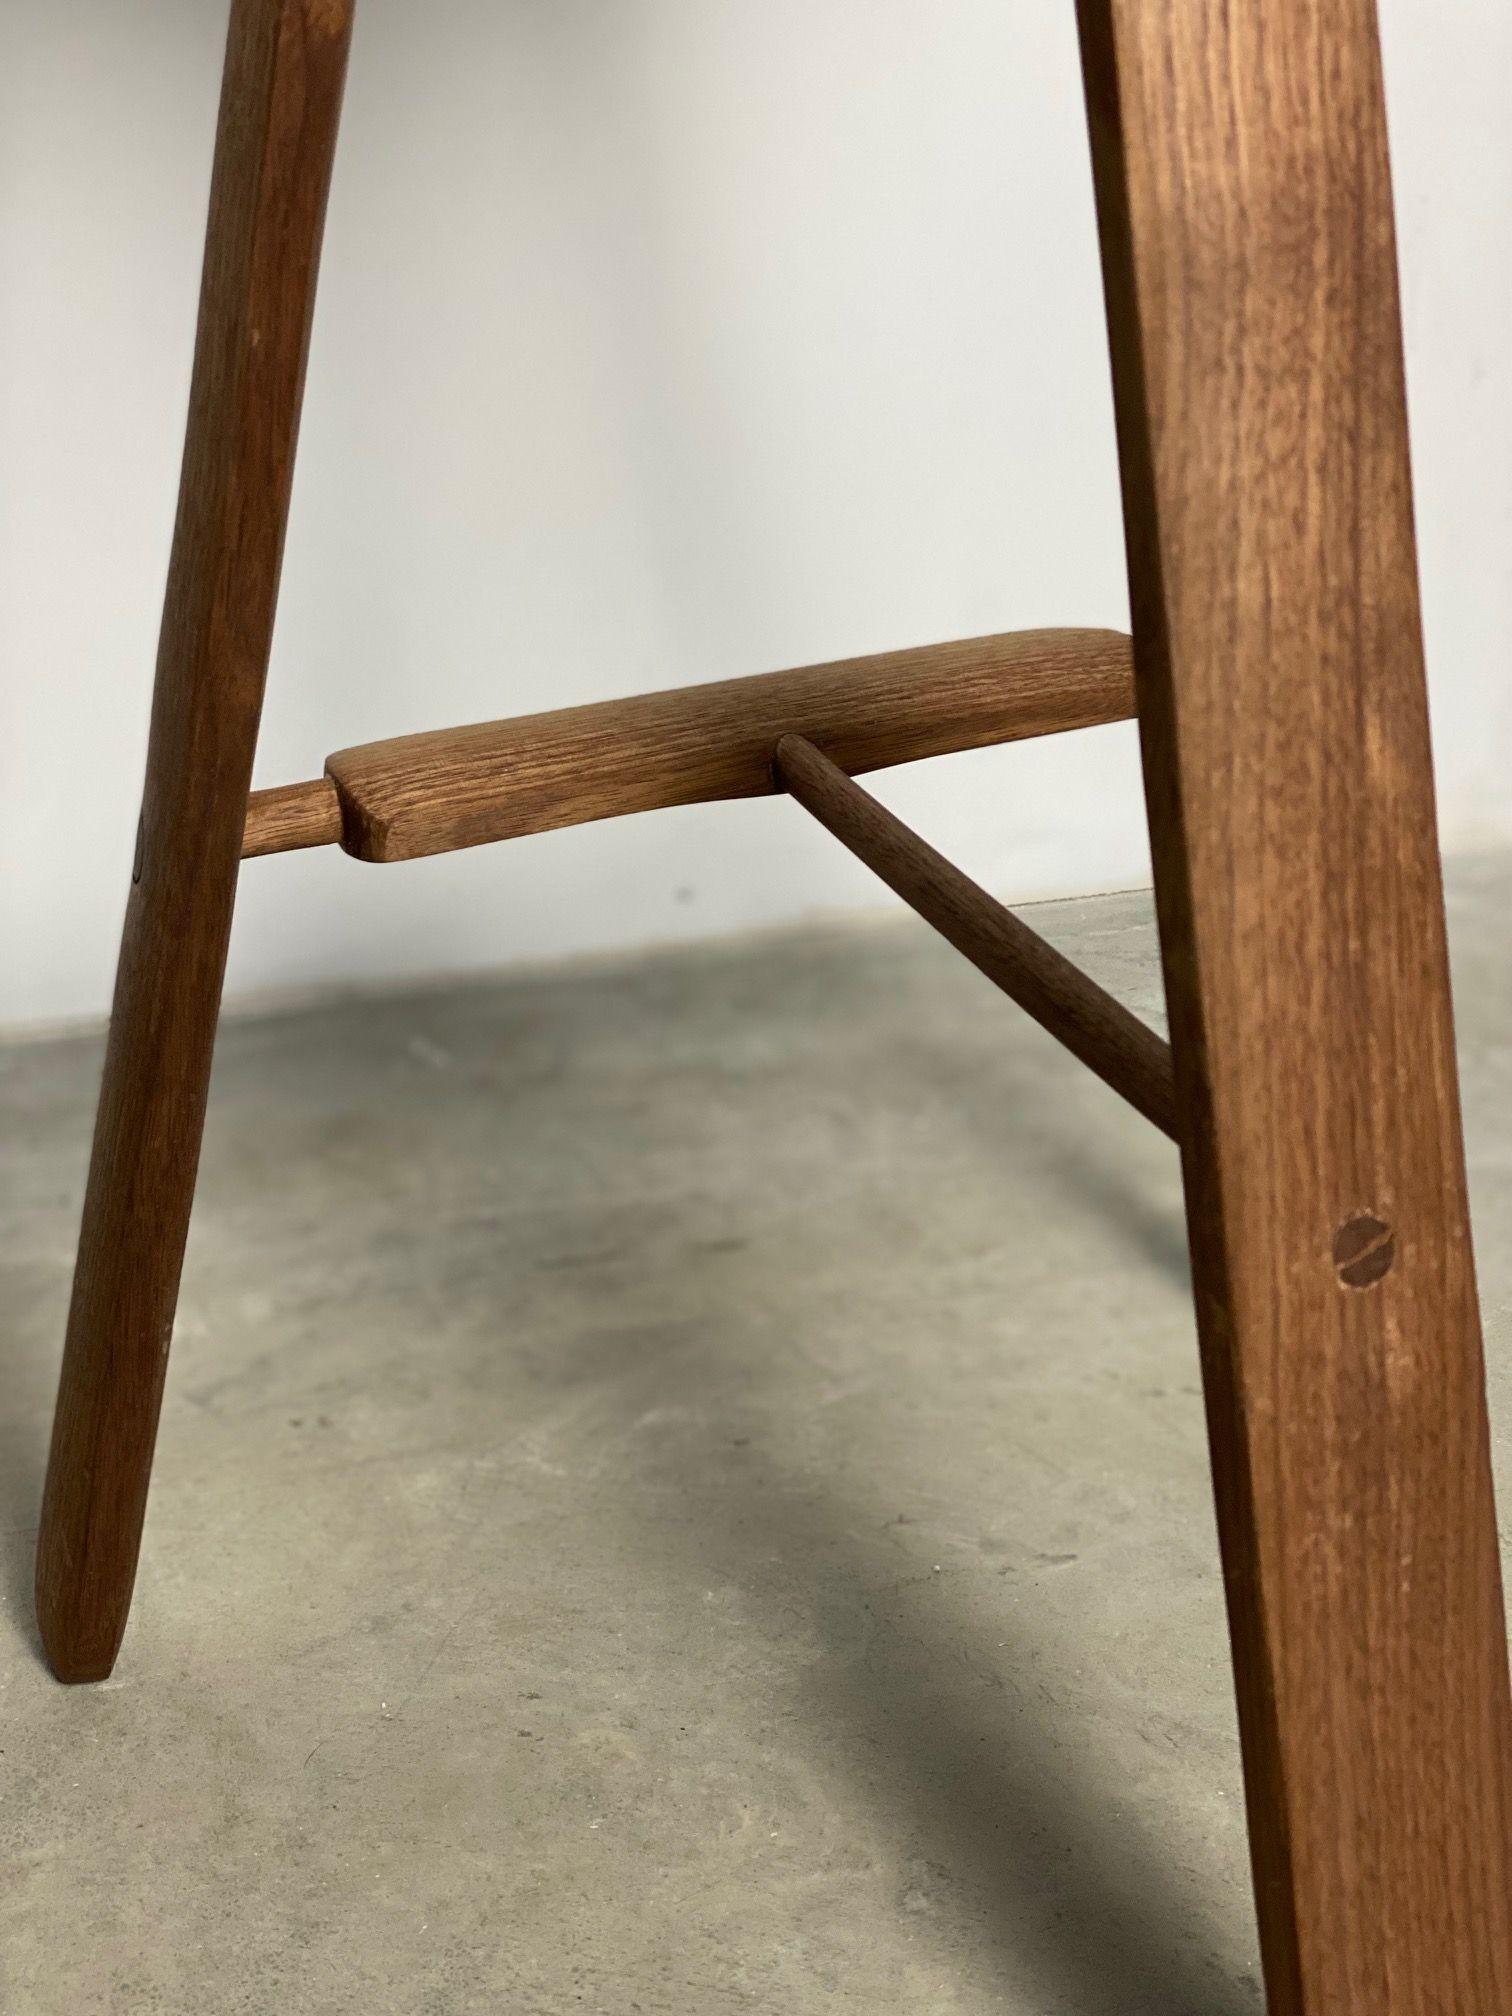 Sculpted Figured Walnut Counter Stool by Michael Rozell, USA 2021 In New Condition For Sale In Berlin, DE